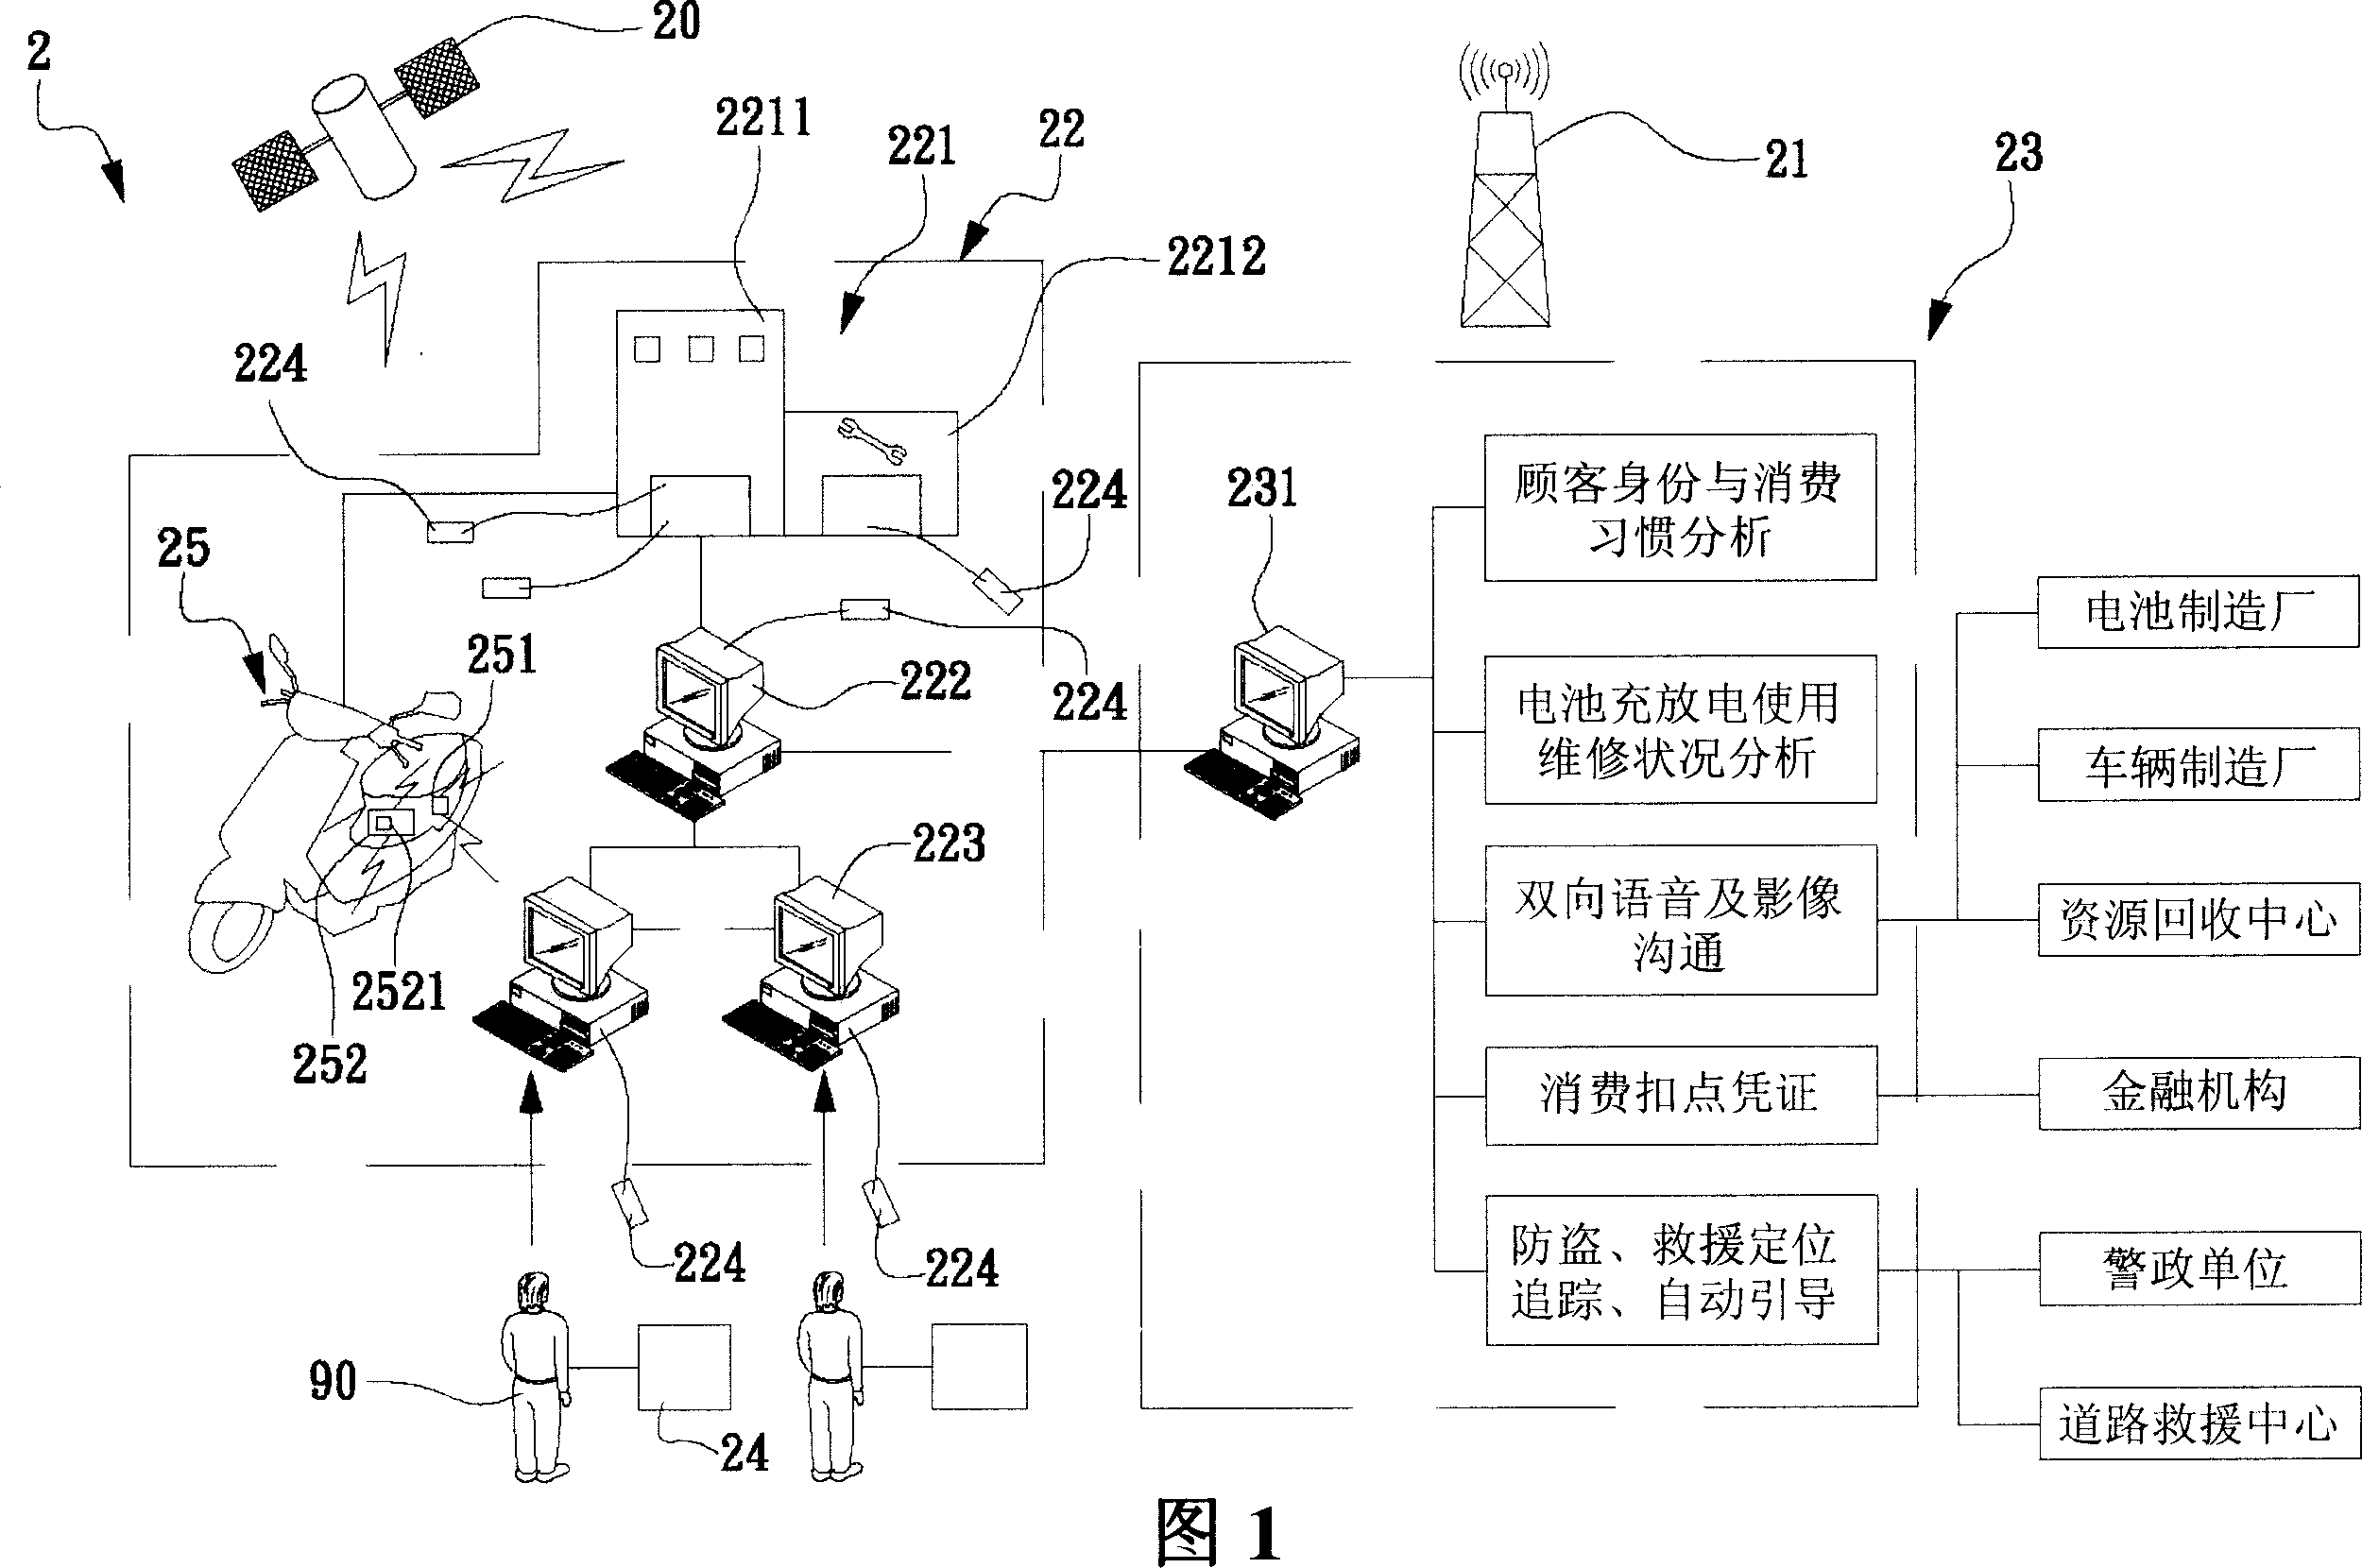 Regional electric motor management device and method